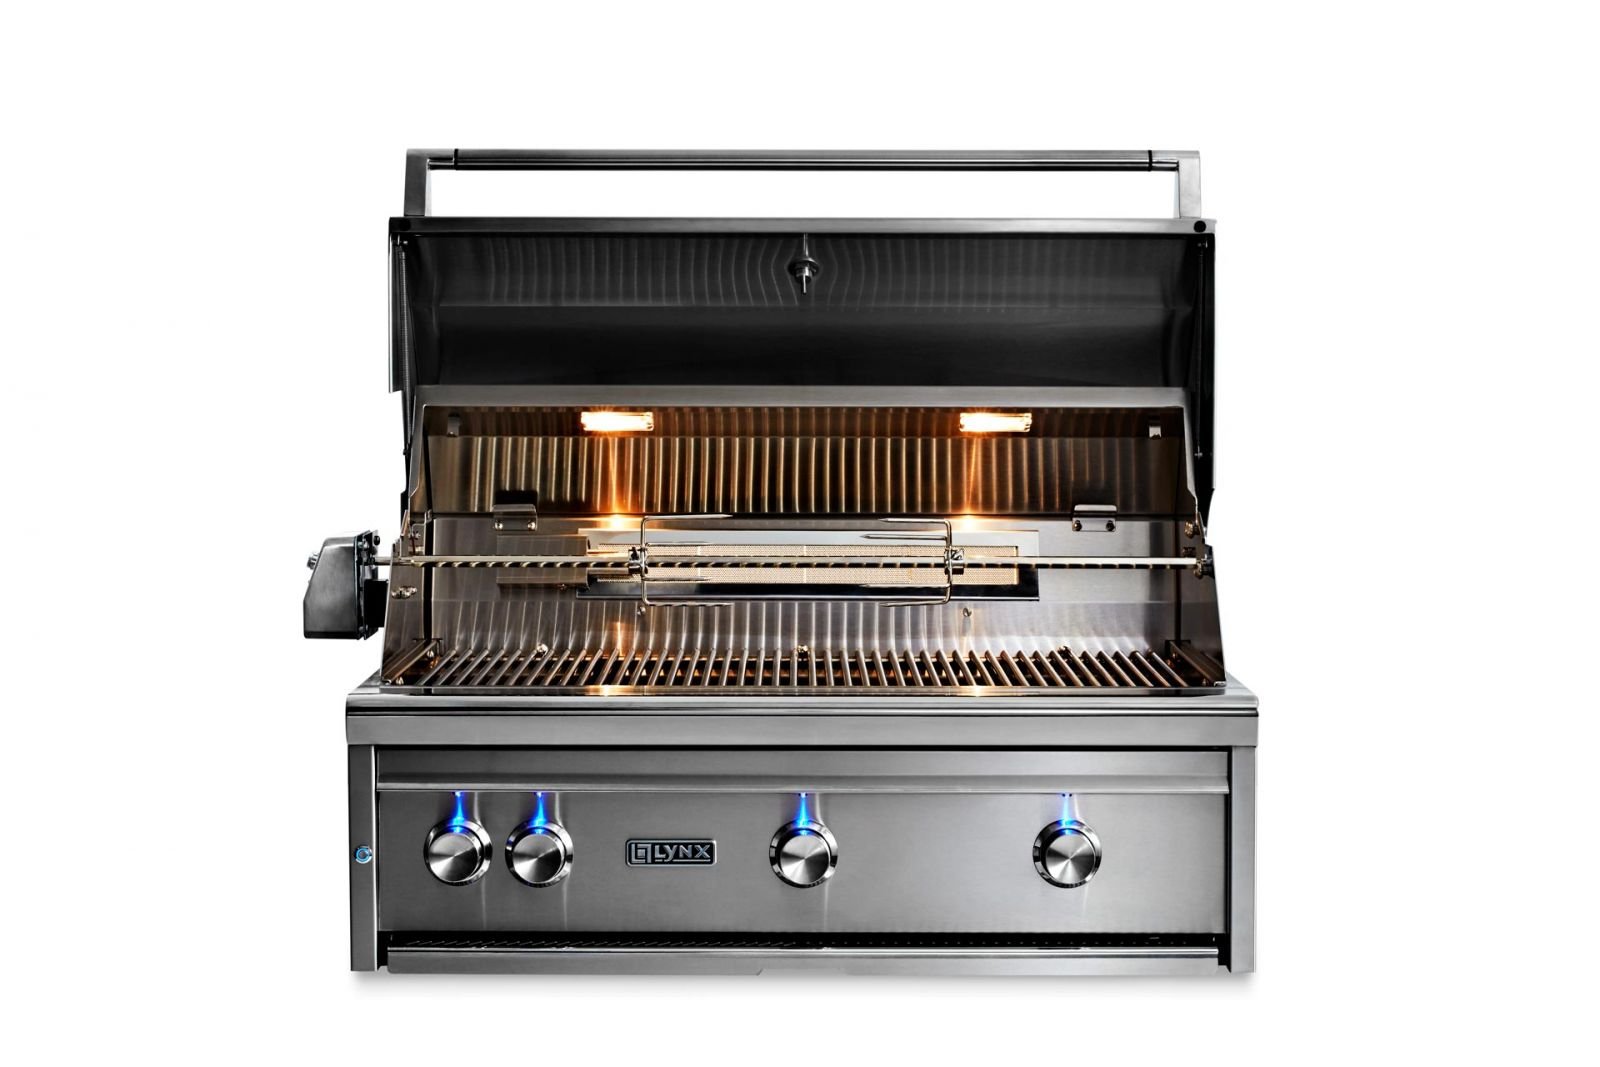 Lynx 36" Professional Built-In Grill with All Trident Infrared Burners and Rotisserie (L36ATR)